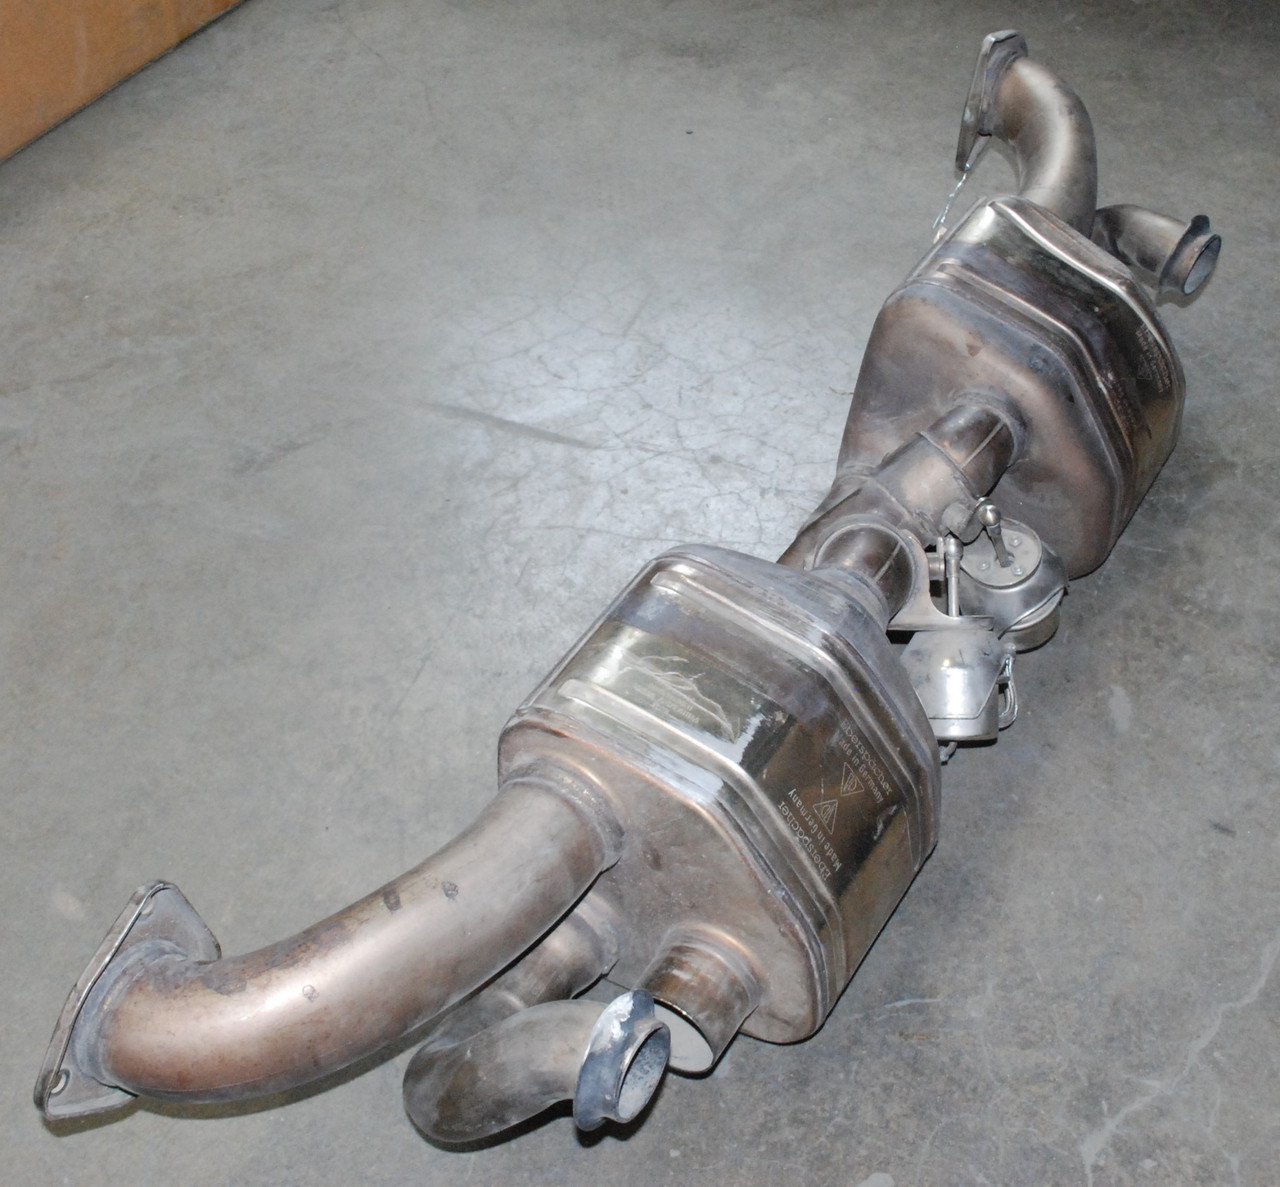 Porsche 911 991 OEM Sport Exhaust Muffler Assembly '12-'16 99111143707 -  Los Angeles LA Dismantler Porsche Parts for 911 Boxster Cayman Cayenne Used  Pre-Owned